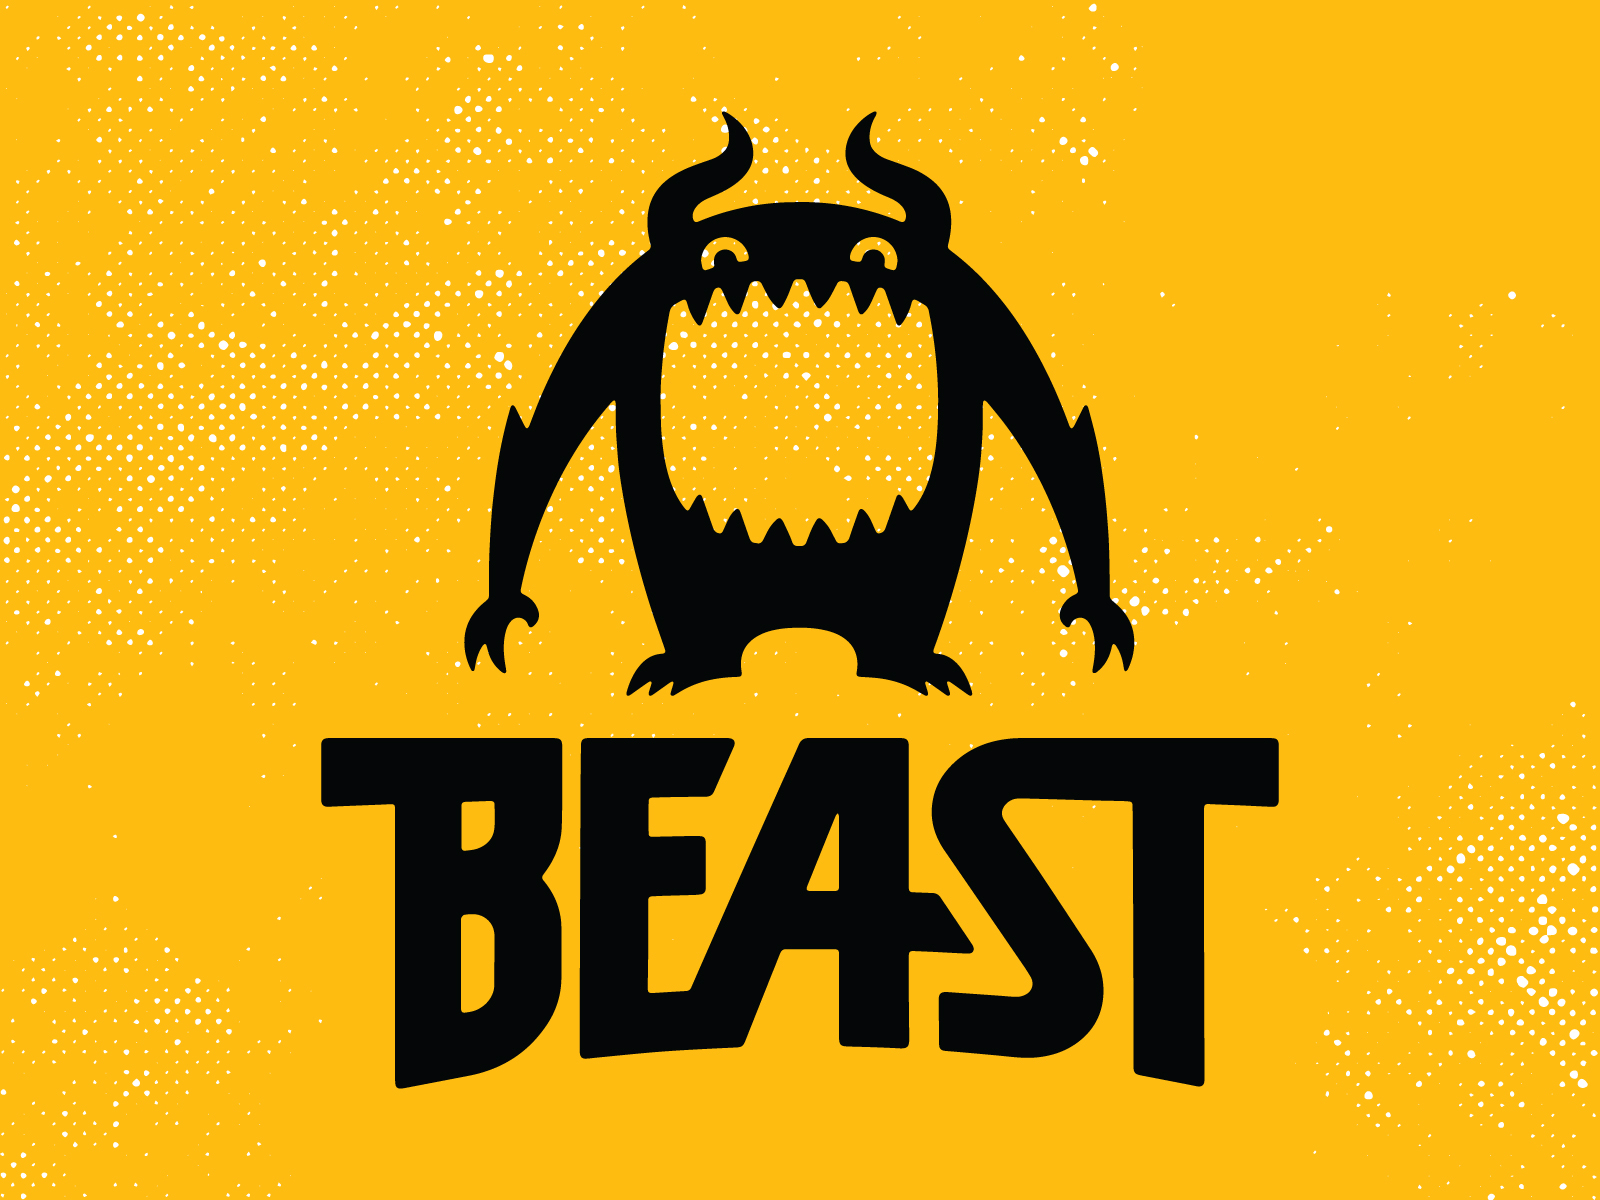 This Logo That Depicts Beast Animals Stock Vector (Royalty Free) 1269922126  | Shutterstock